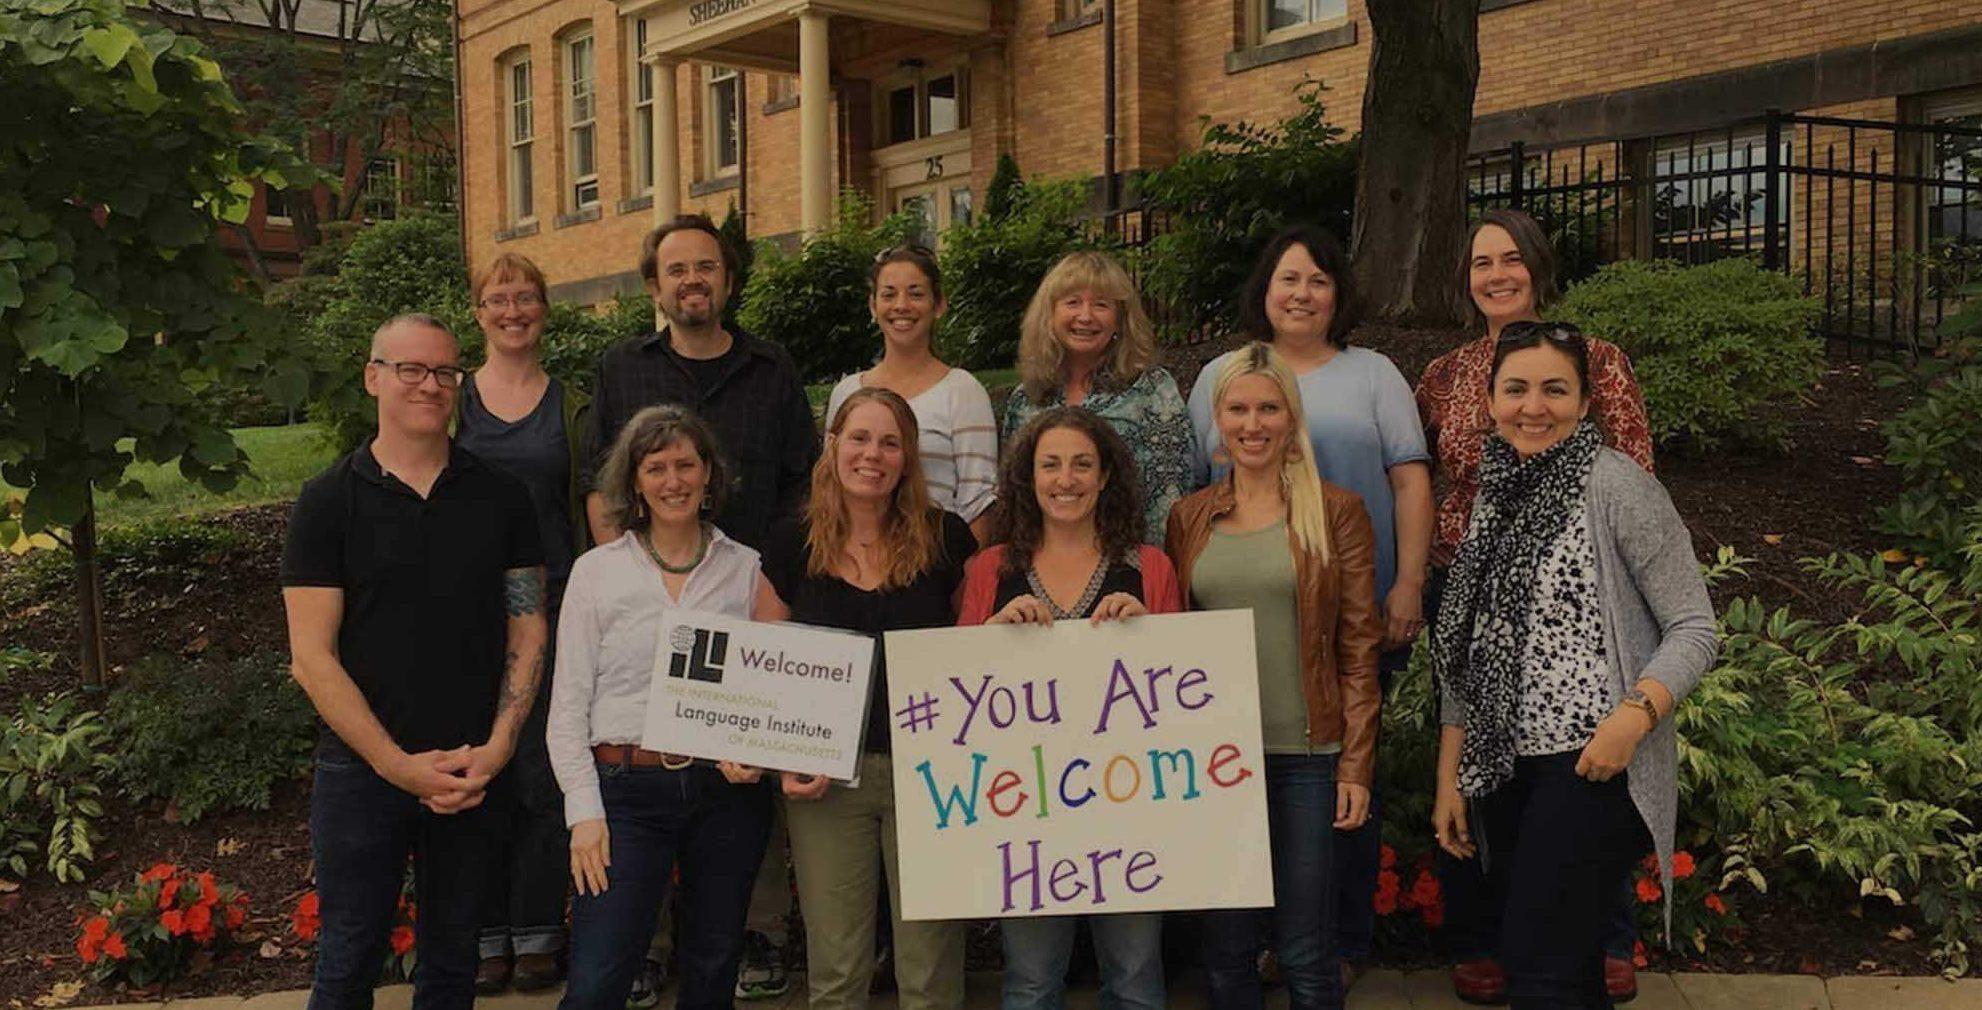 Members of the teaching team and board of ILI Massachusetts stand in front of their school, housed in an impressive brick built establishment with tall windows set in its own grounds of grass, flowerbeds and and mature trees. Some of the 12 staff are holding signs saying "You are welcome here". Everyone is smiling cheerfully.